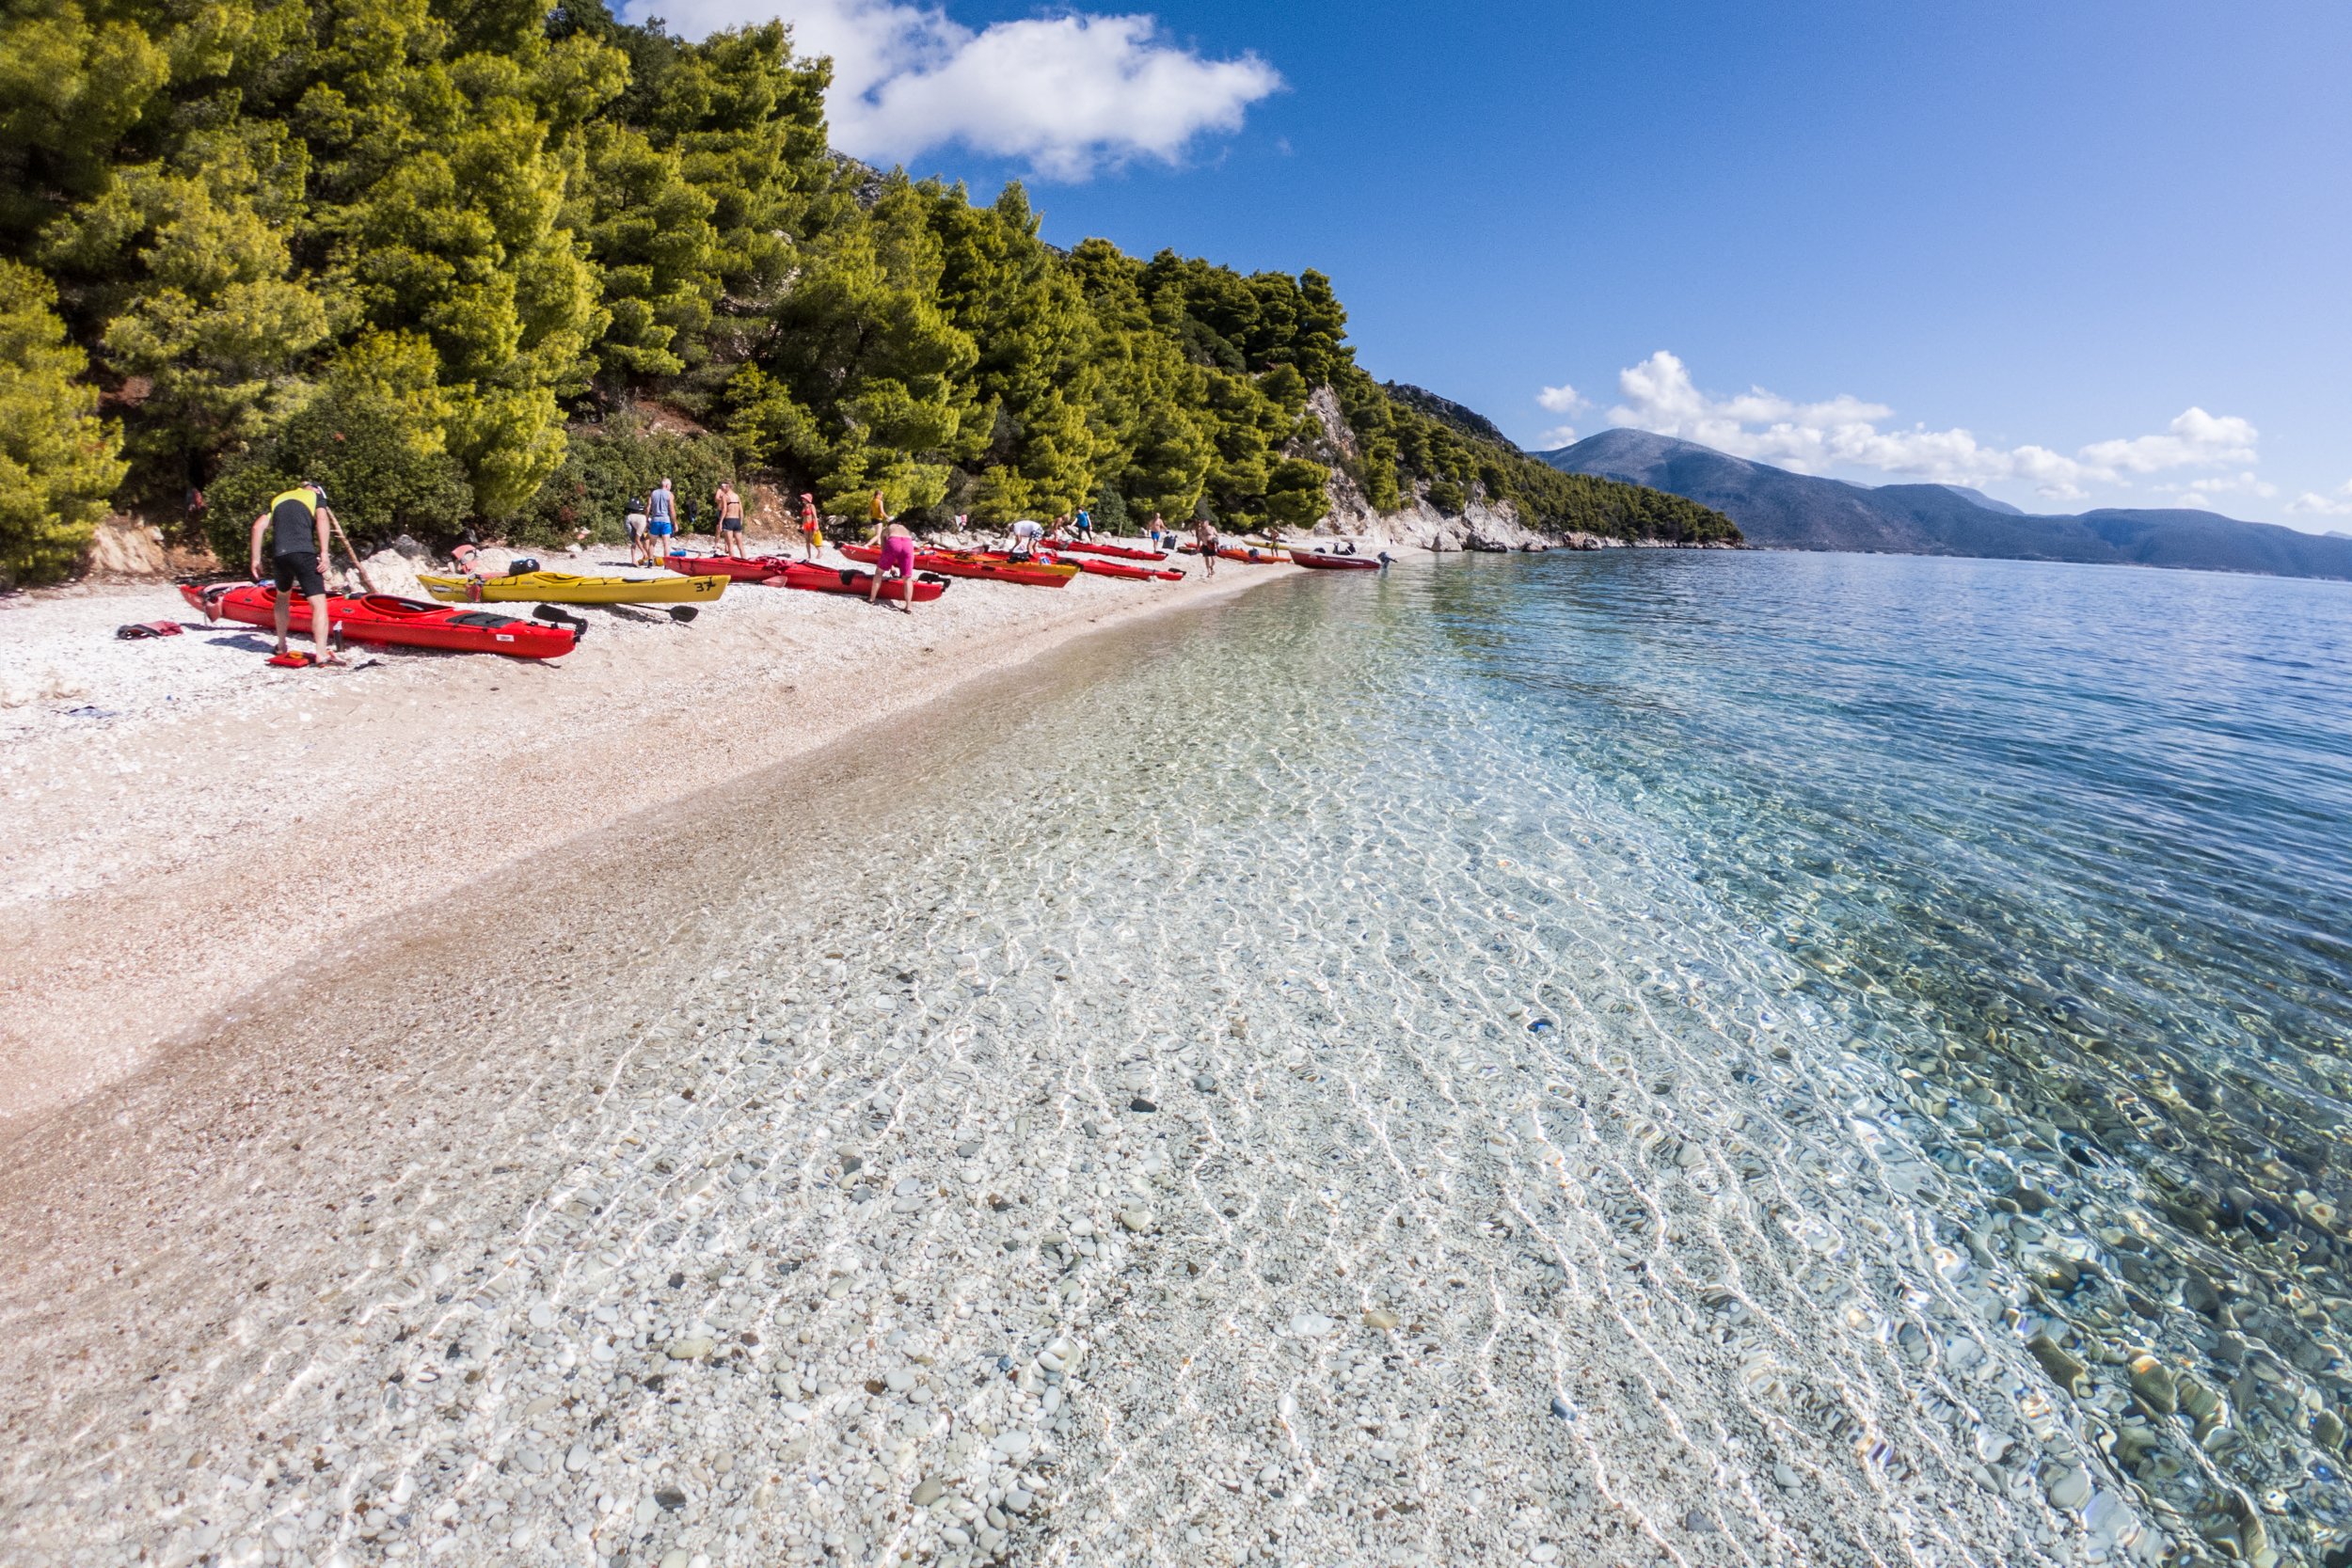 Swim At The Sandy Beaches Of Lefkada On The Lefkada Sea Kayak And Camping Adventure 3 Day Package Tour_89